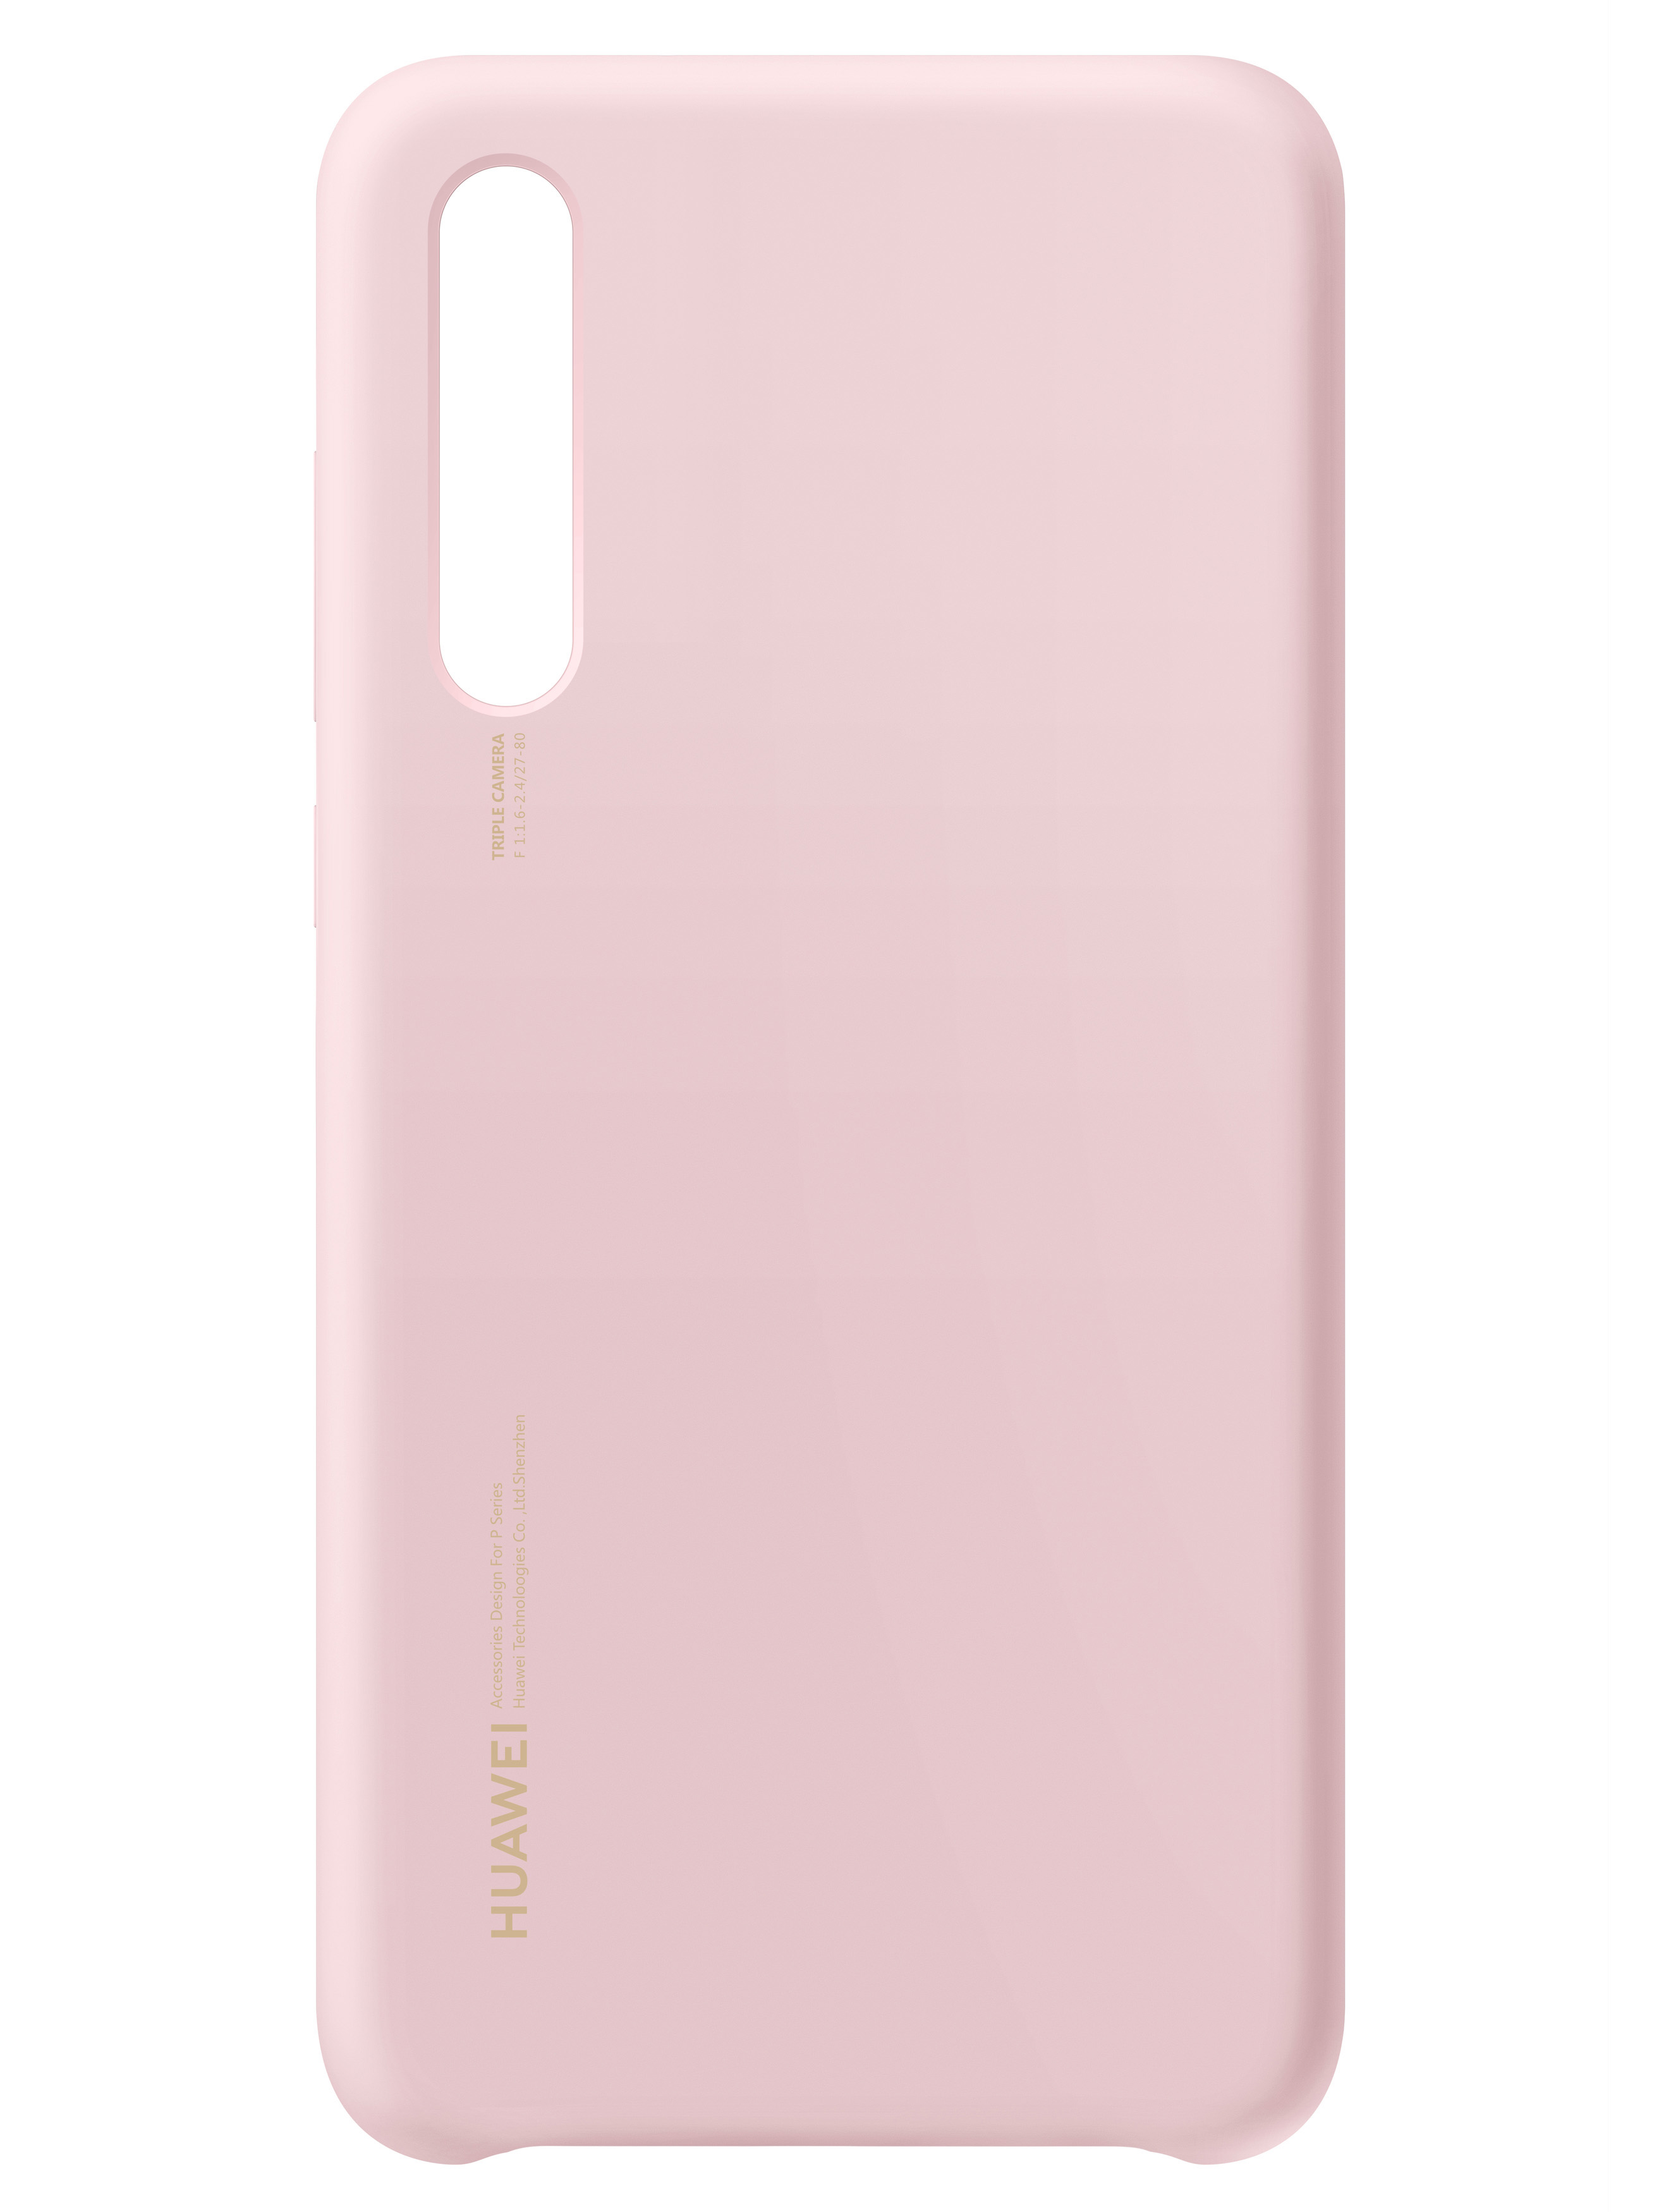 HUAWEI Silicon Pink Backcover, P20 Pro, Huawei, Case